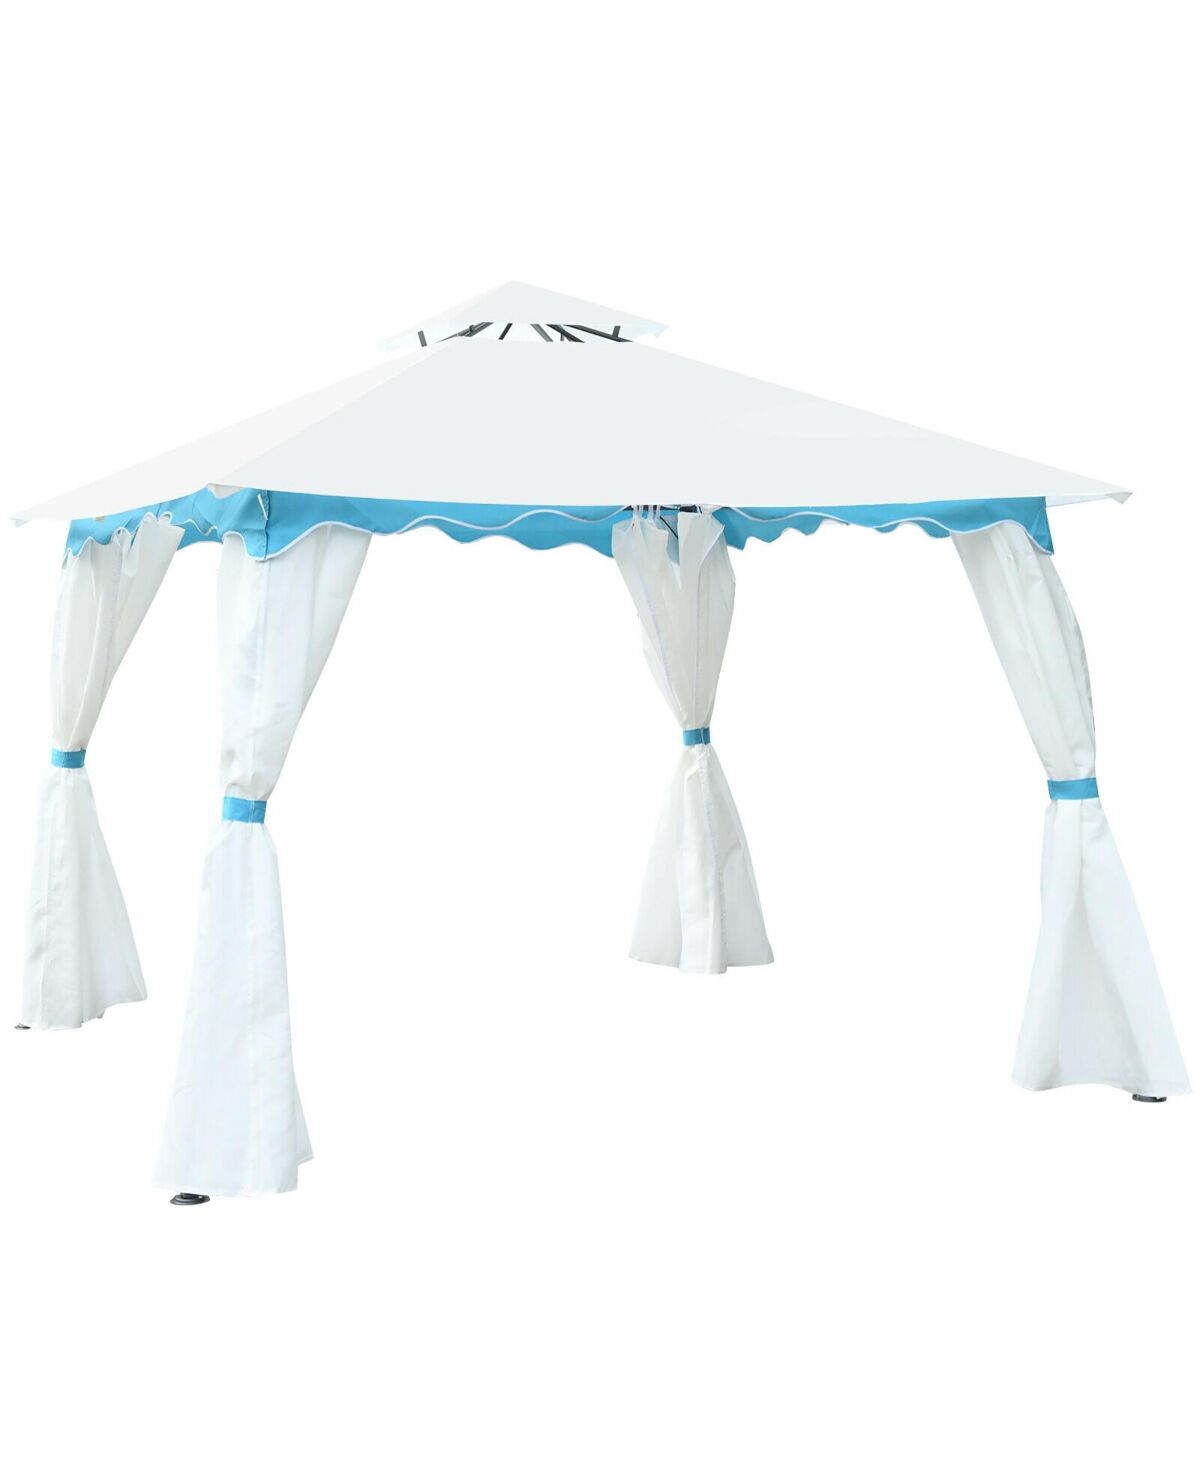 Costway 2 Tier 10'x10' Patio Gazebo Canopy Tent Steel Frame Shelter Awning W/Side Walls - White